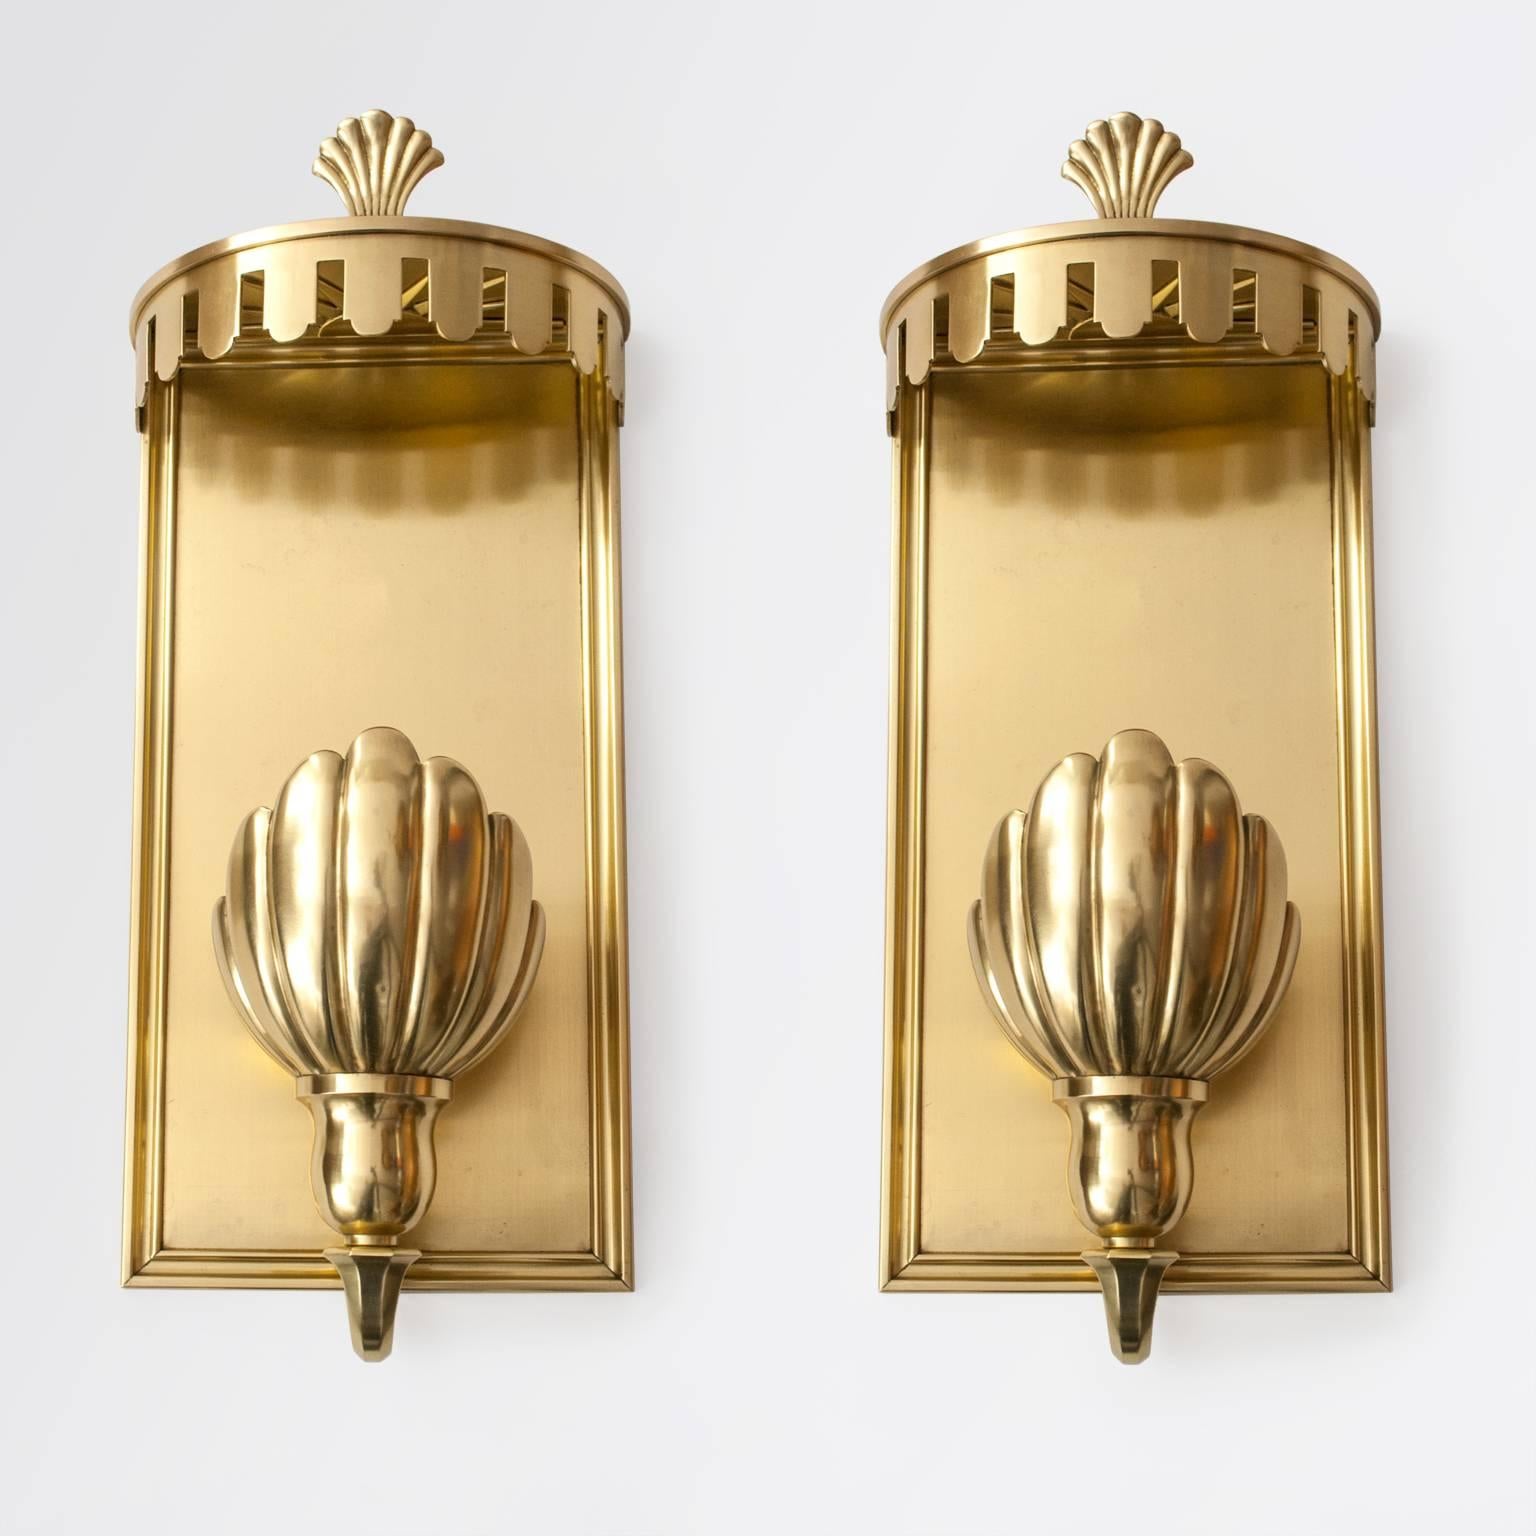 Very fine and large pair of polished brass sconces which embody the restrained elegance of what the French press described as 